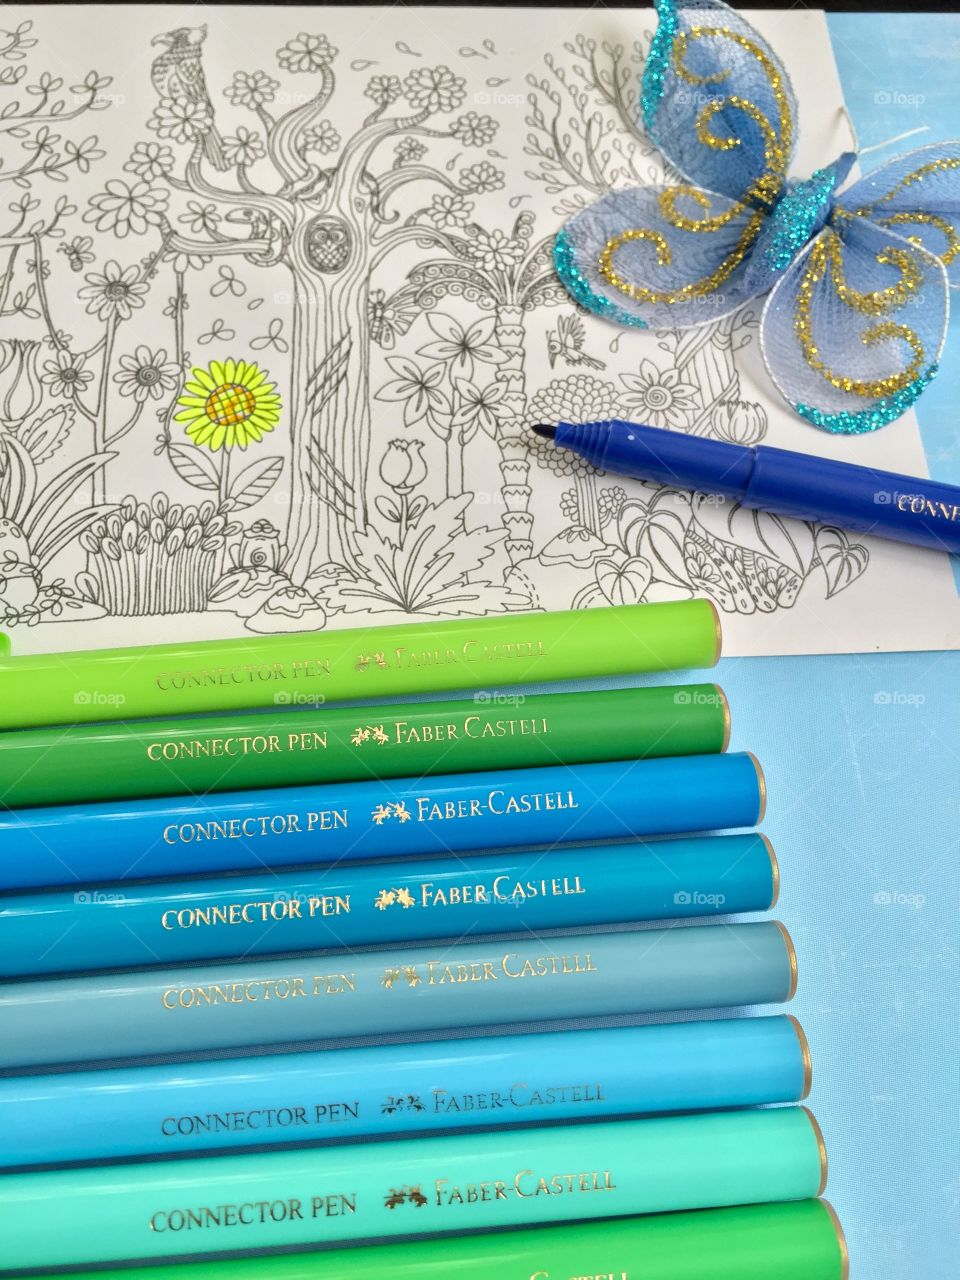 Fun time with faber castell coloring pen